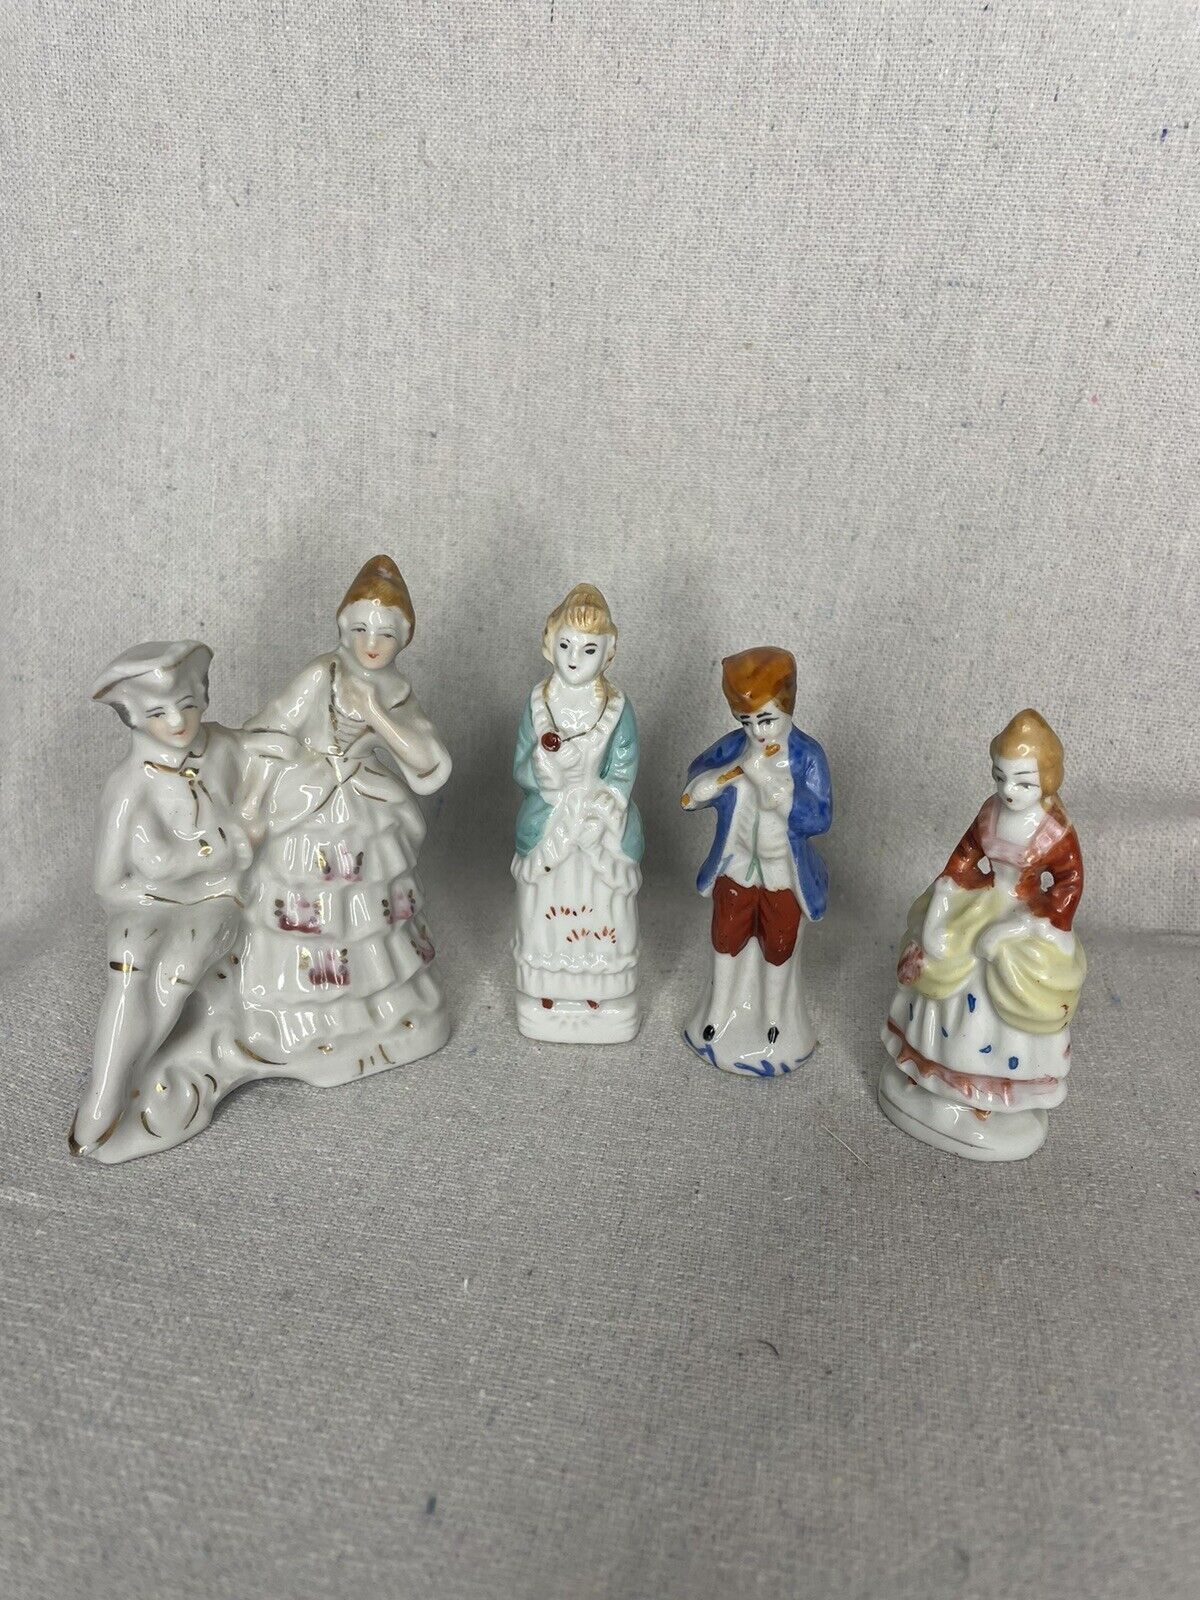 Lot Of 4 Vintage Porcelain Hand-Painted Figurines – Made in Occupied Japan